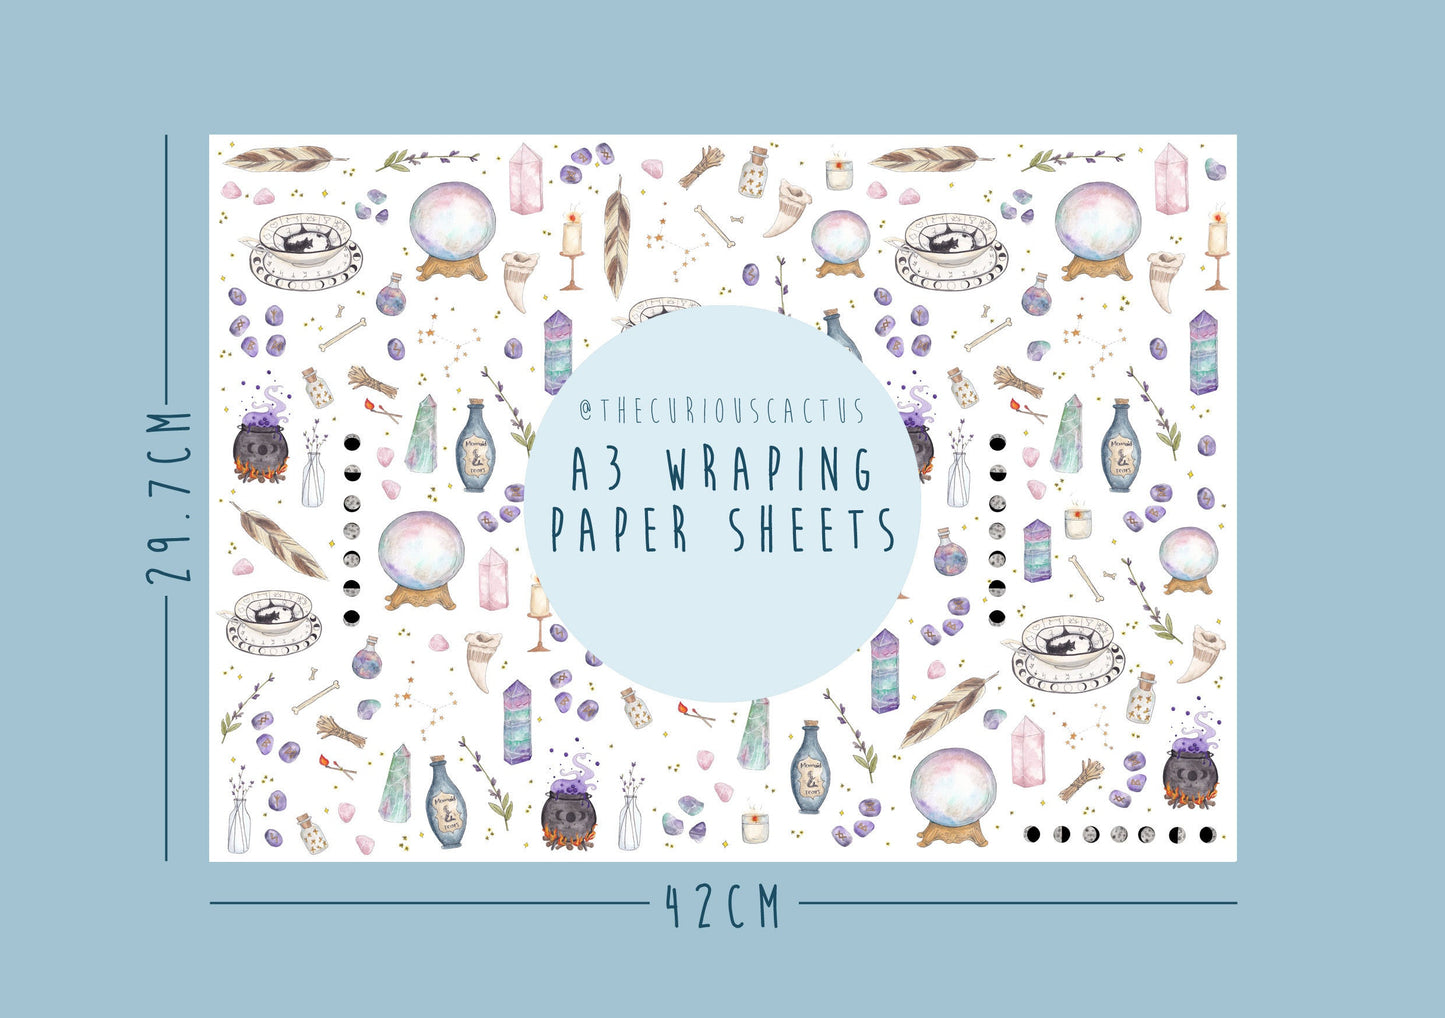 Witchy A3 Wrapping Paper